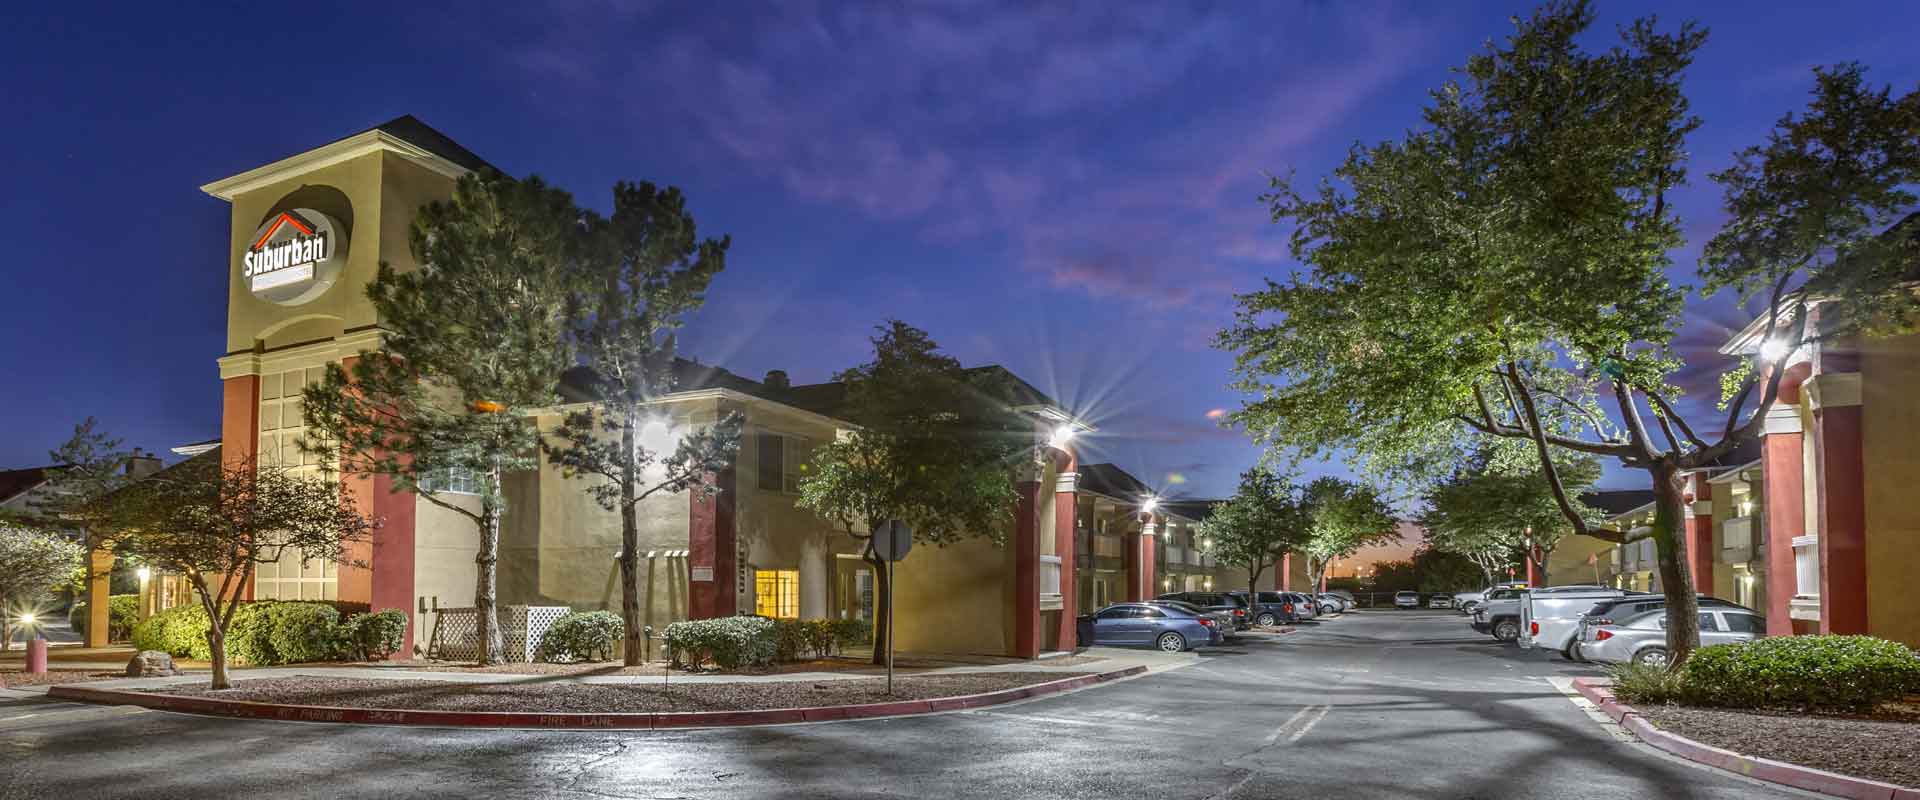 Suburban Extended Stay | Albuquerque Budget Affordable Lodging